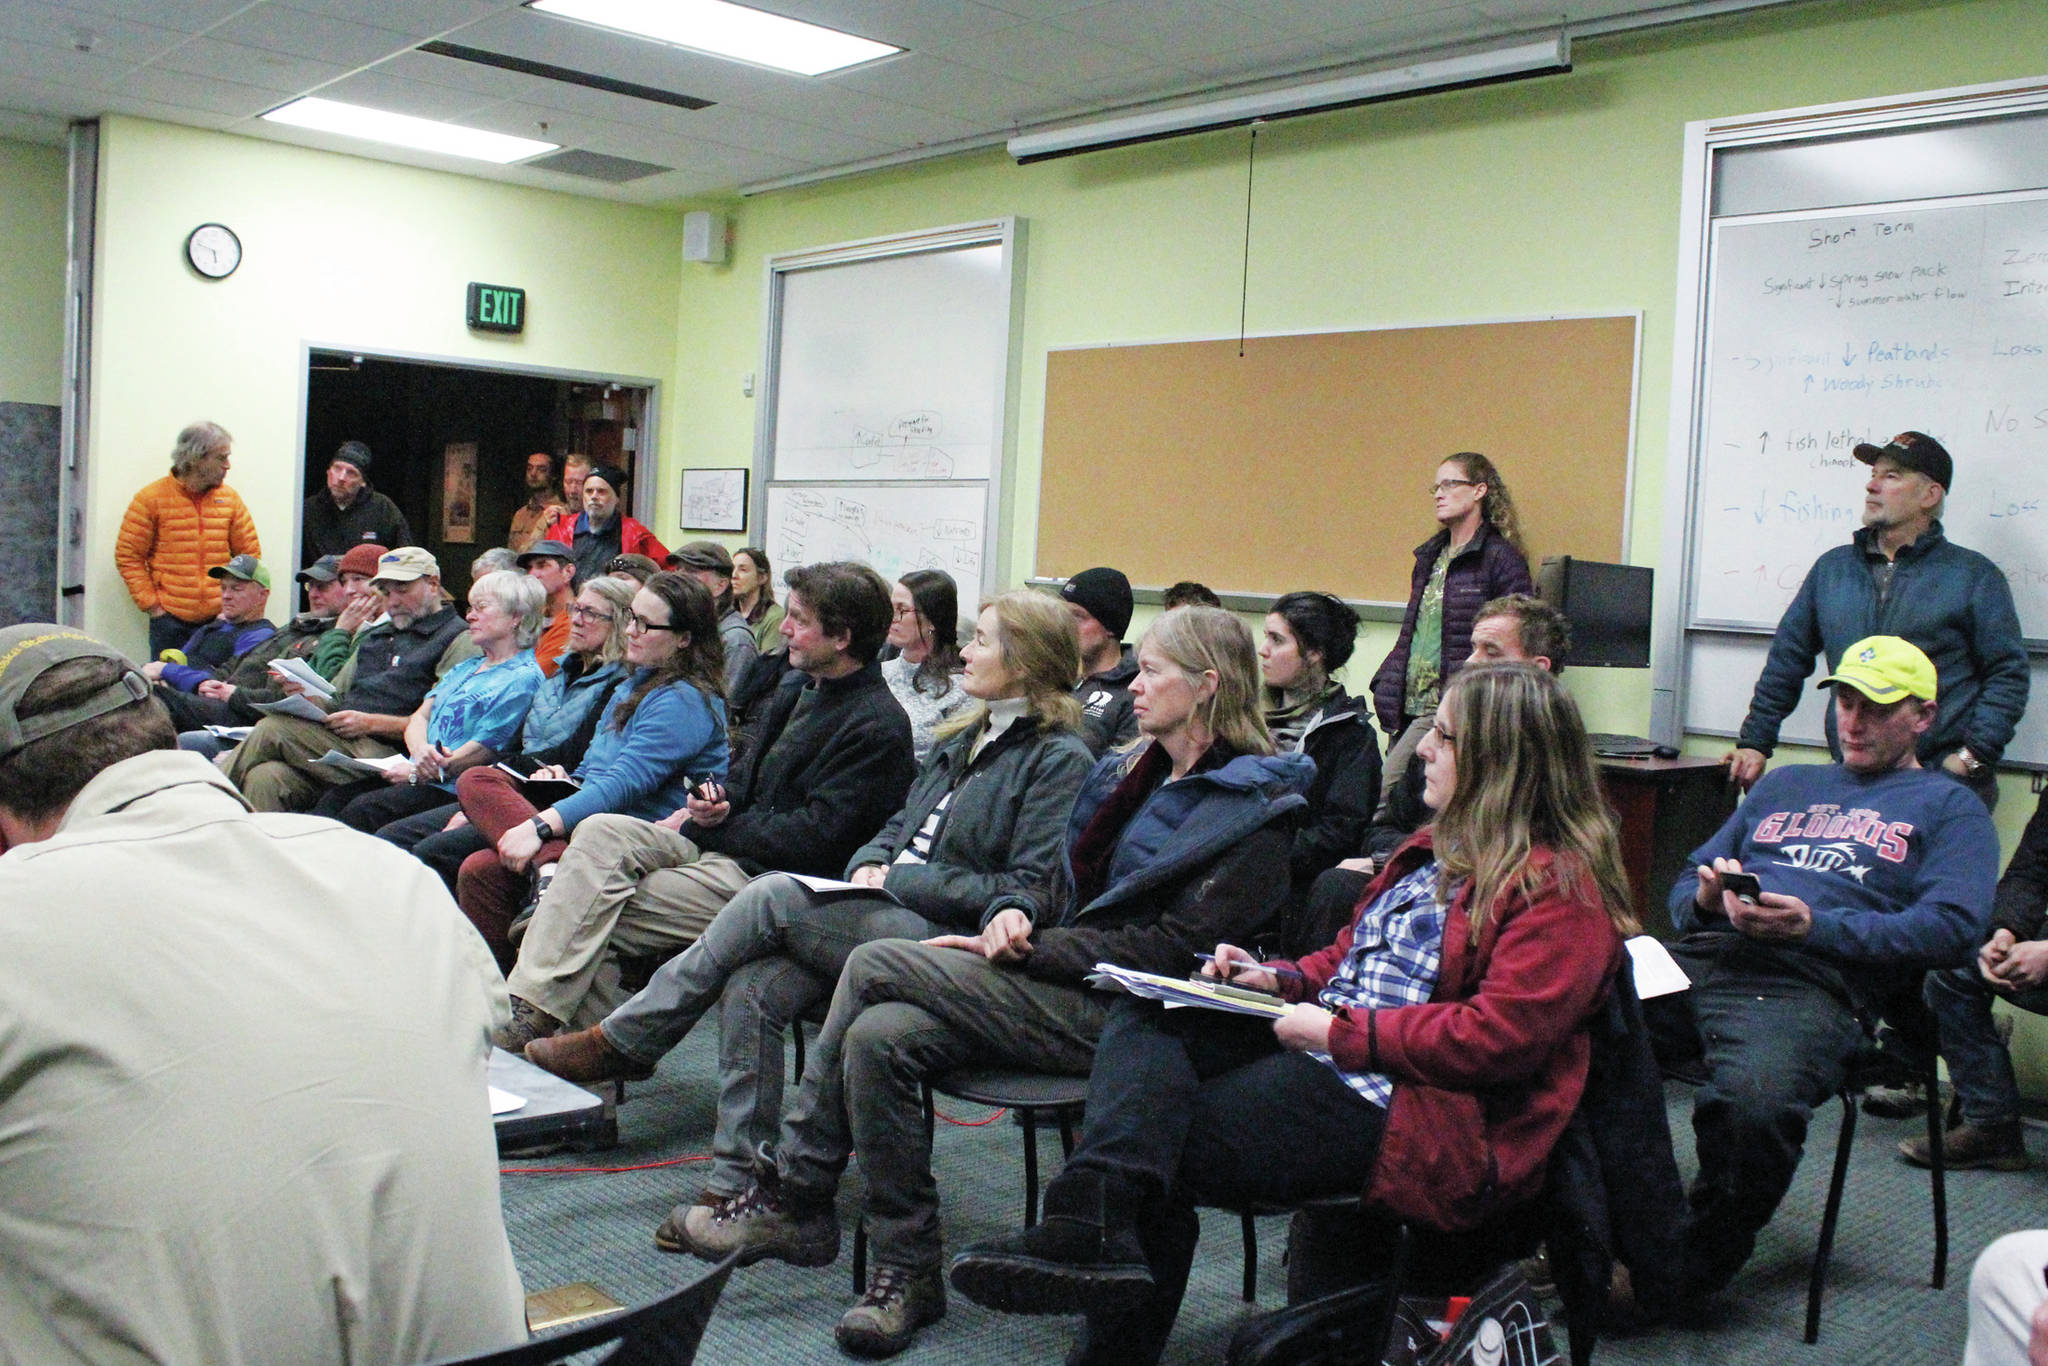 Members of the public wait their turn to give comments at a Kachemak Bay State Parks Citizen Advisory Board meeting Wednesday, Dec. 11, 2019 at the Alaska Islands & Ocean Visitor Center in Homer, Alaska. The board decided to hear comments on the proposal by the Department of Fish and Game to repeal the ban on personal watercraft in critical habitat areas of Kachemak Bay. The state park waters overlap in some places with the critical habitat waters. (Photo buy Megan Pacer/Homer News)